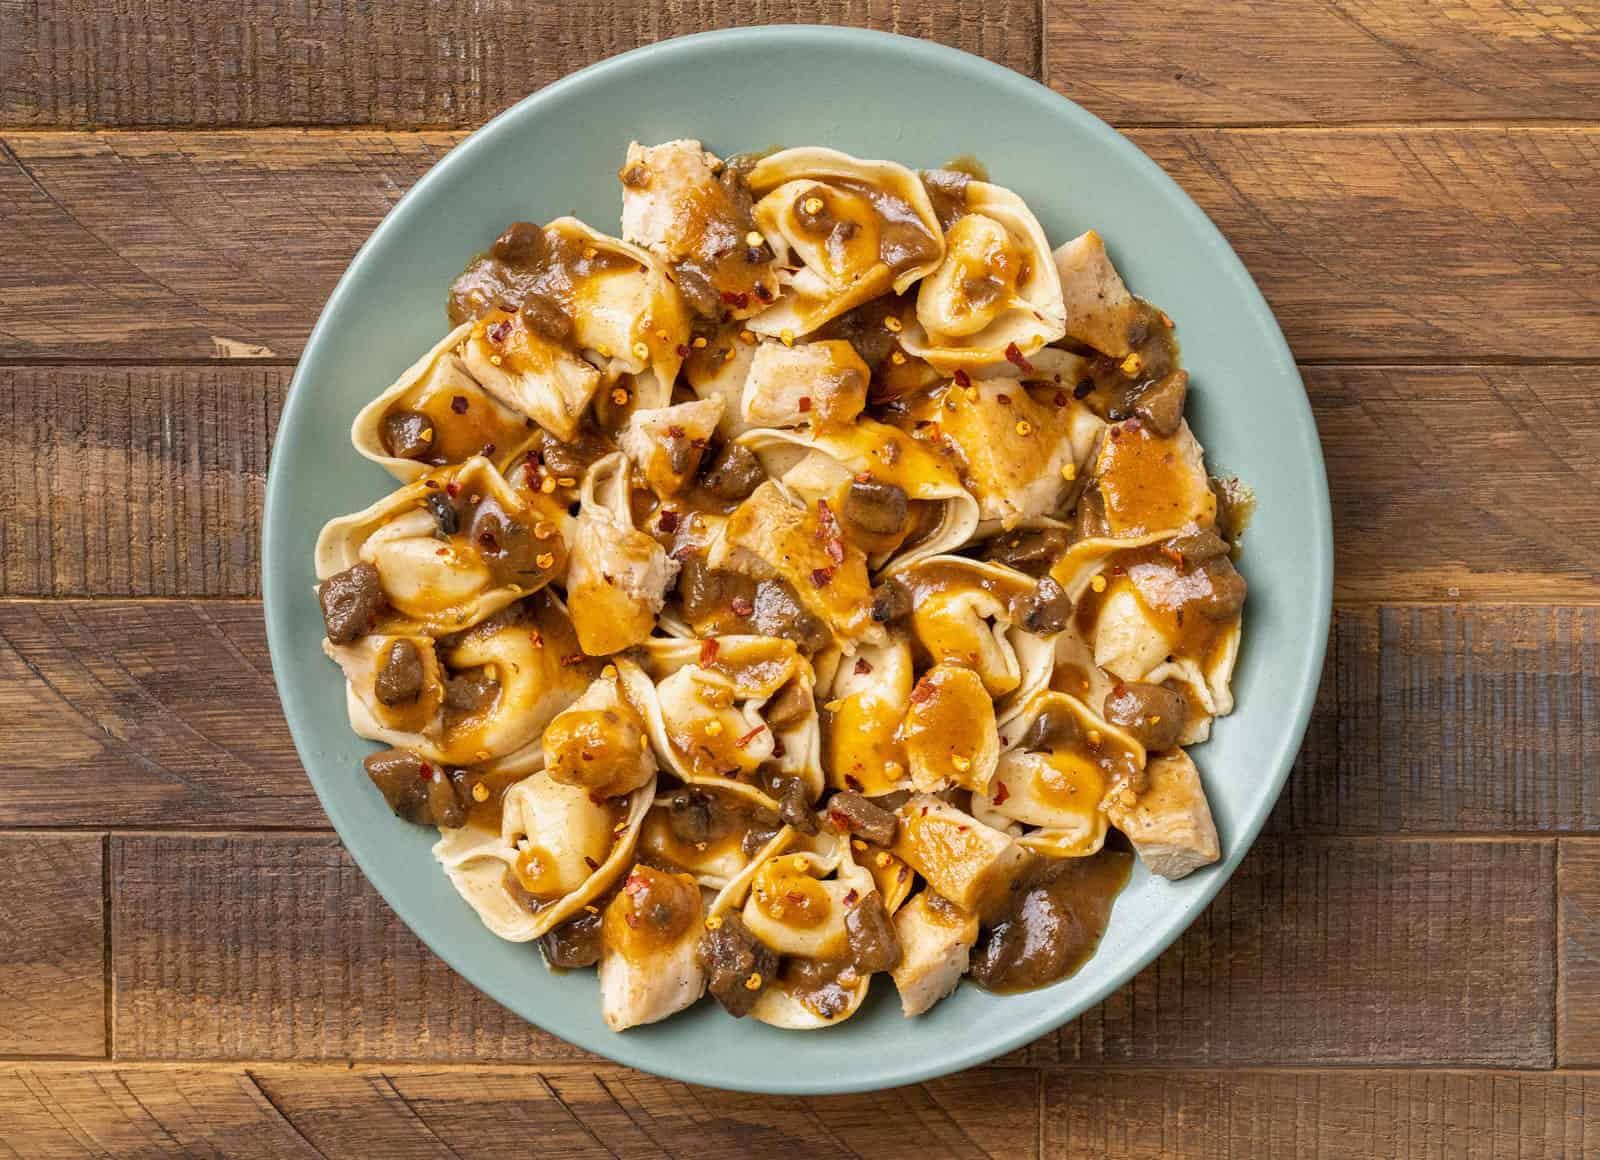 A blue plate with cheese tortelloni and seared chicken pieces topped with a brown gravy sauce with mushroom chunks.